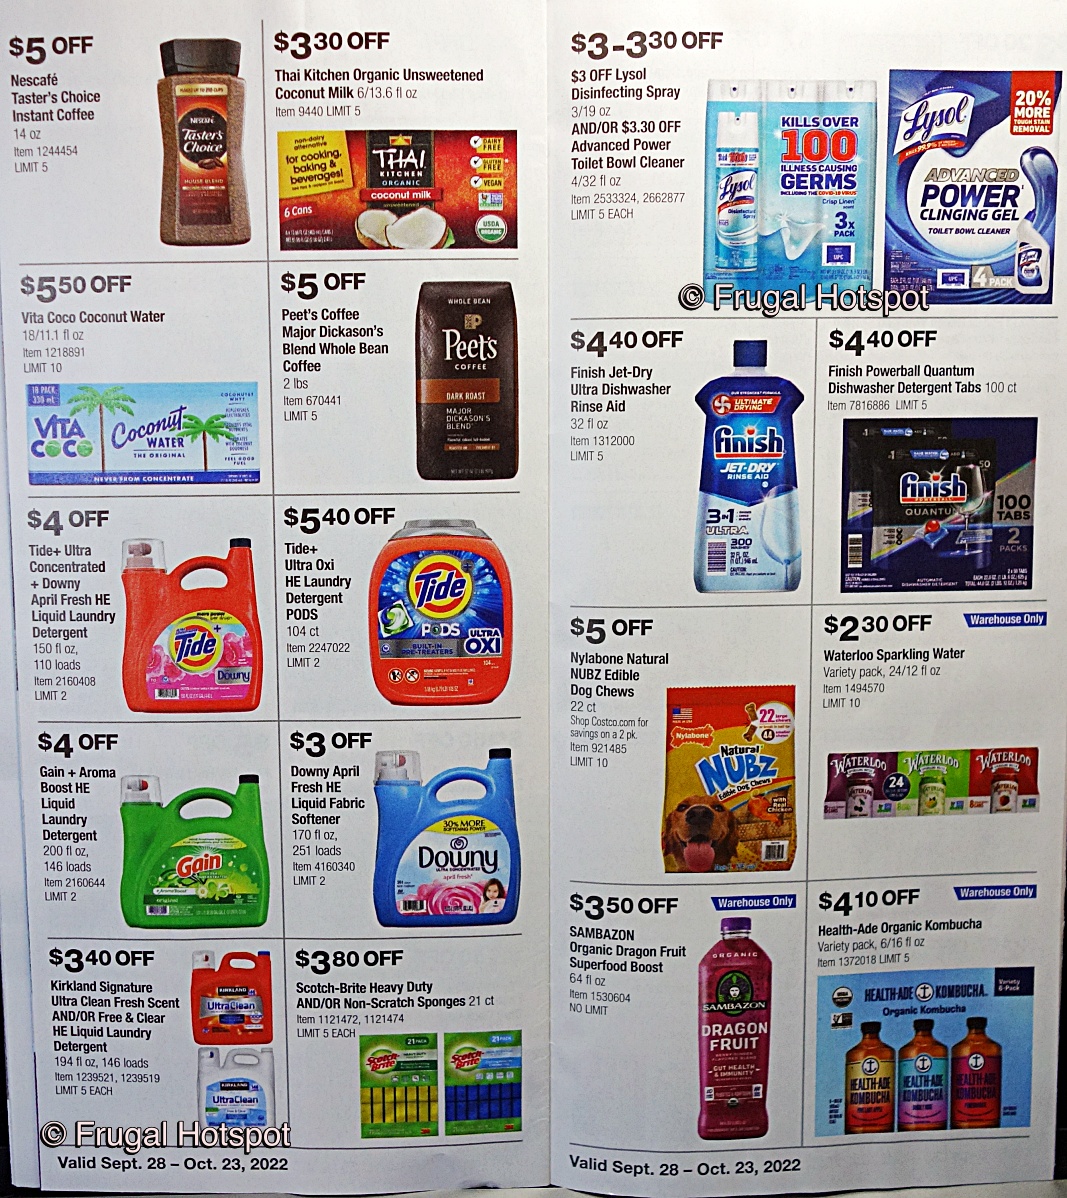 Costco Coupon Book OCTOBER 2022 | Pages 18 and 19